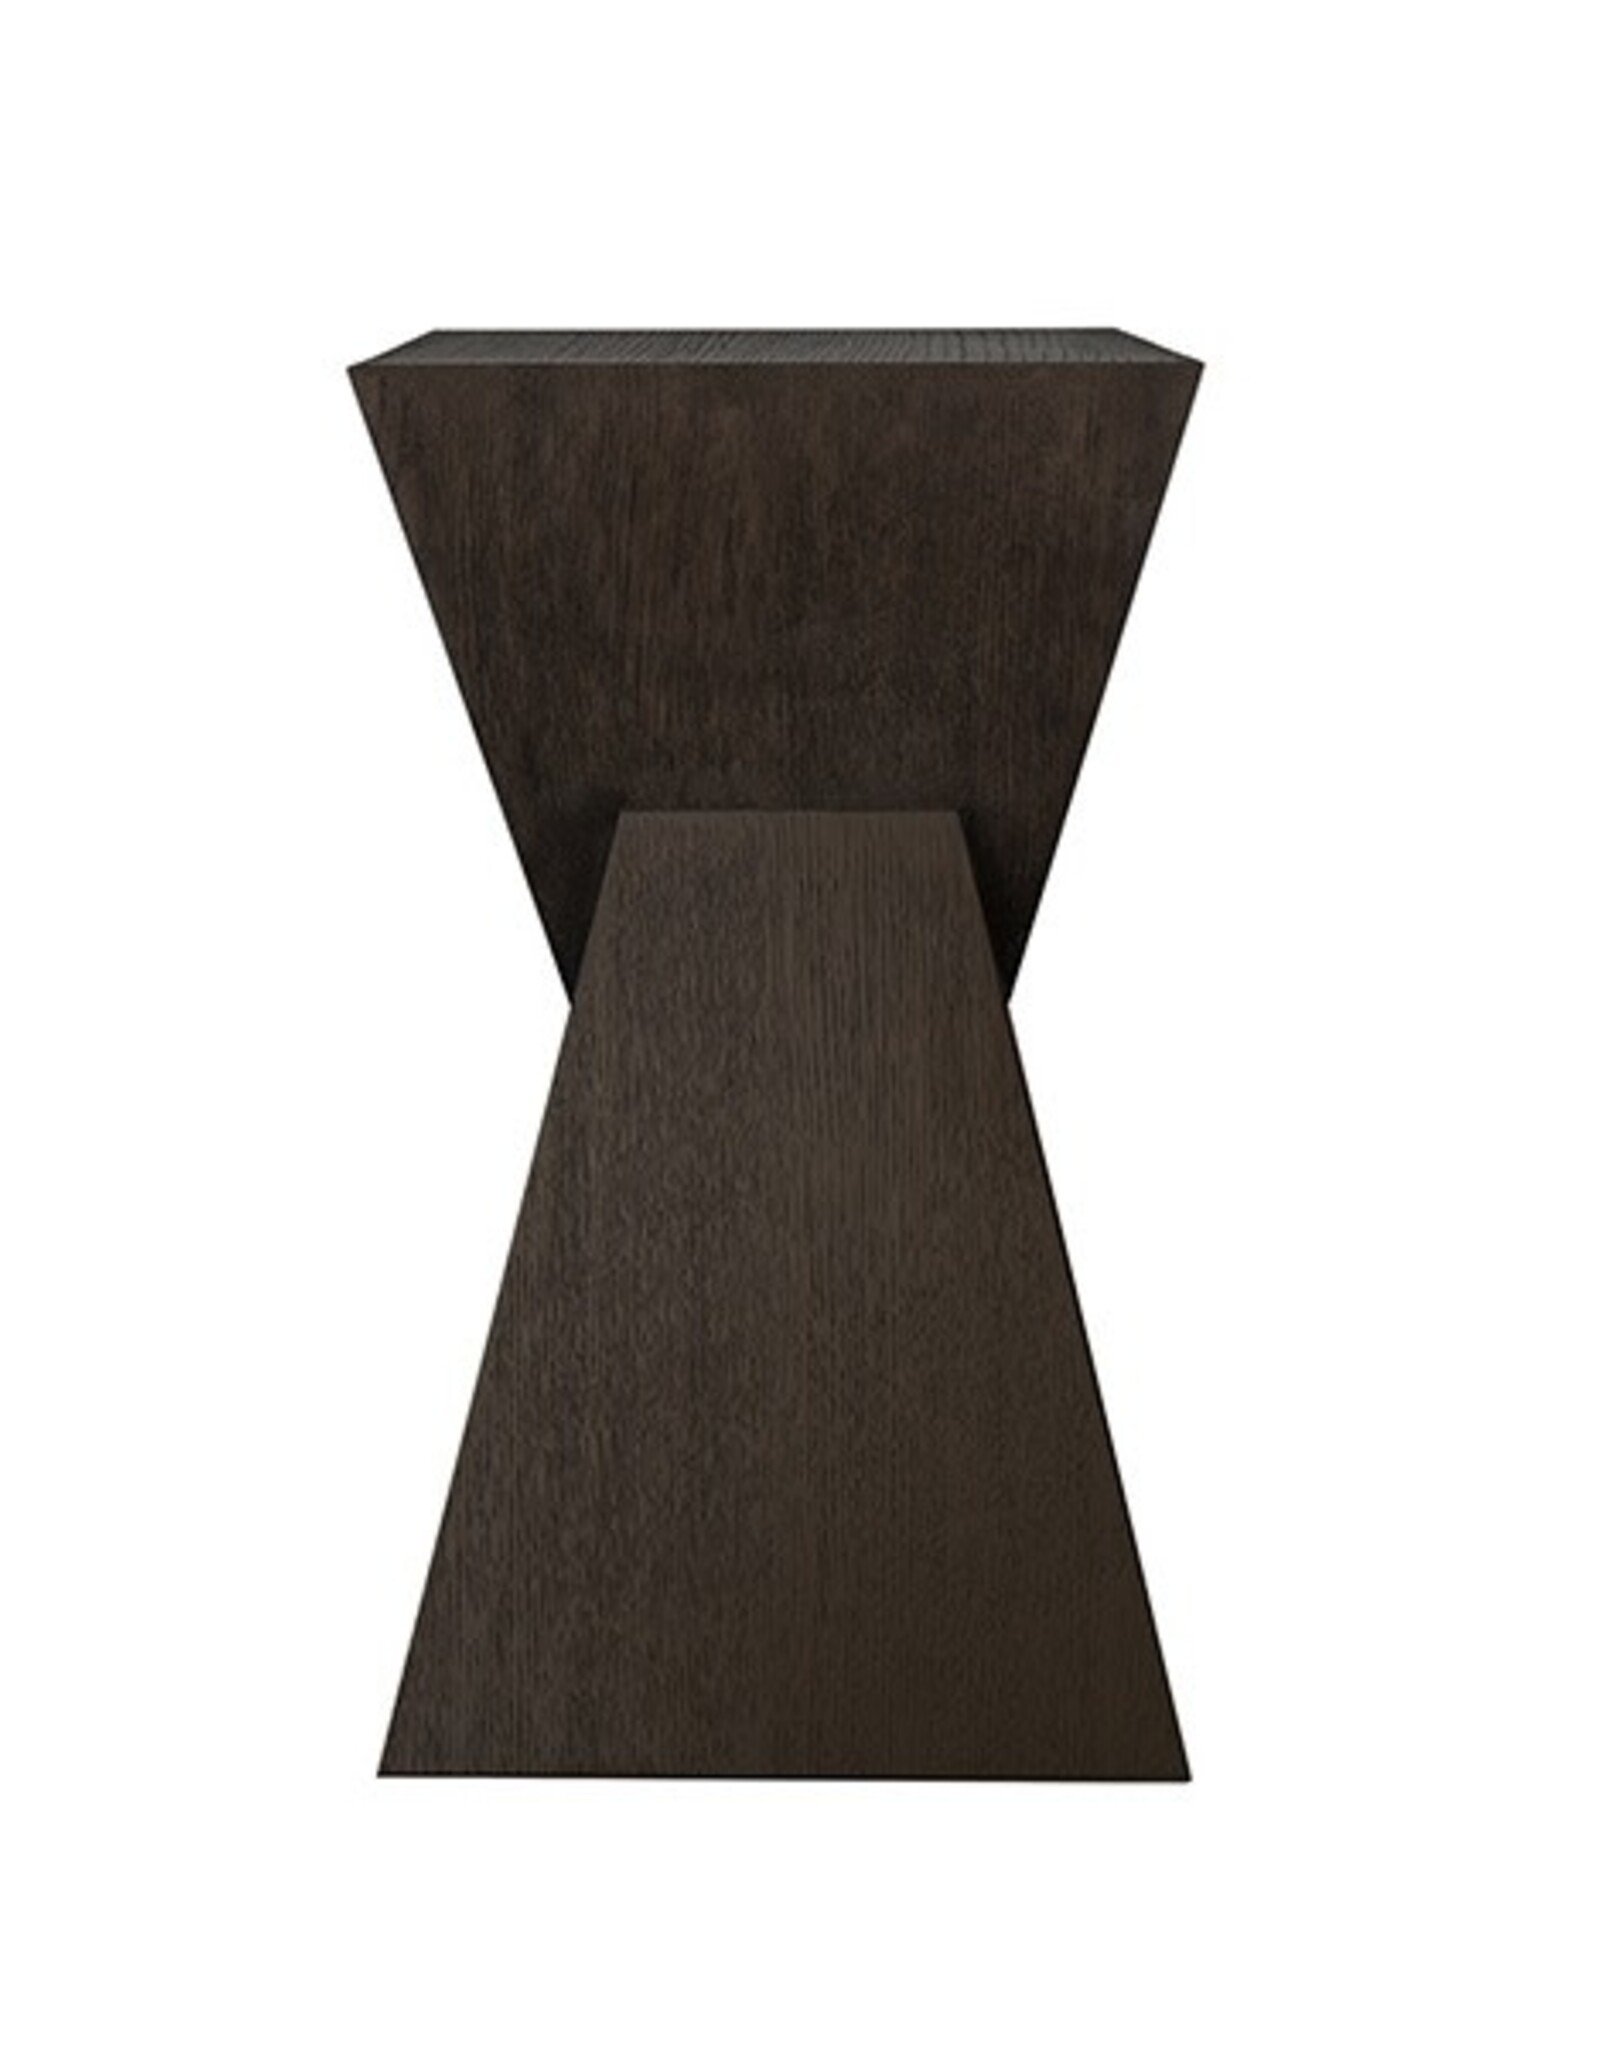 Worlds Away Scout Accent Table, Espresso Oak